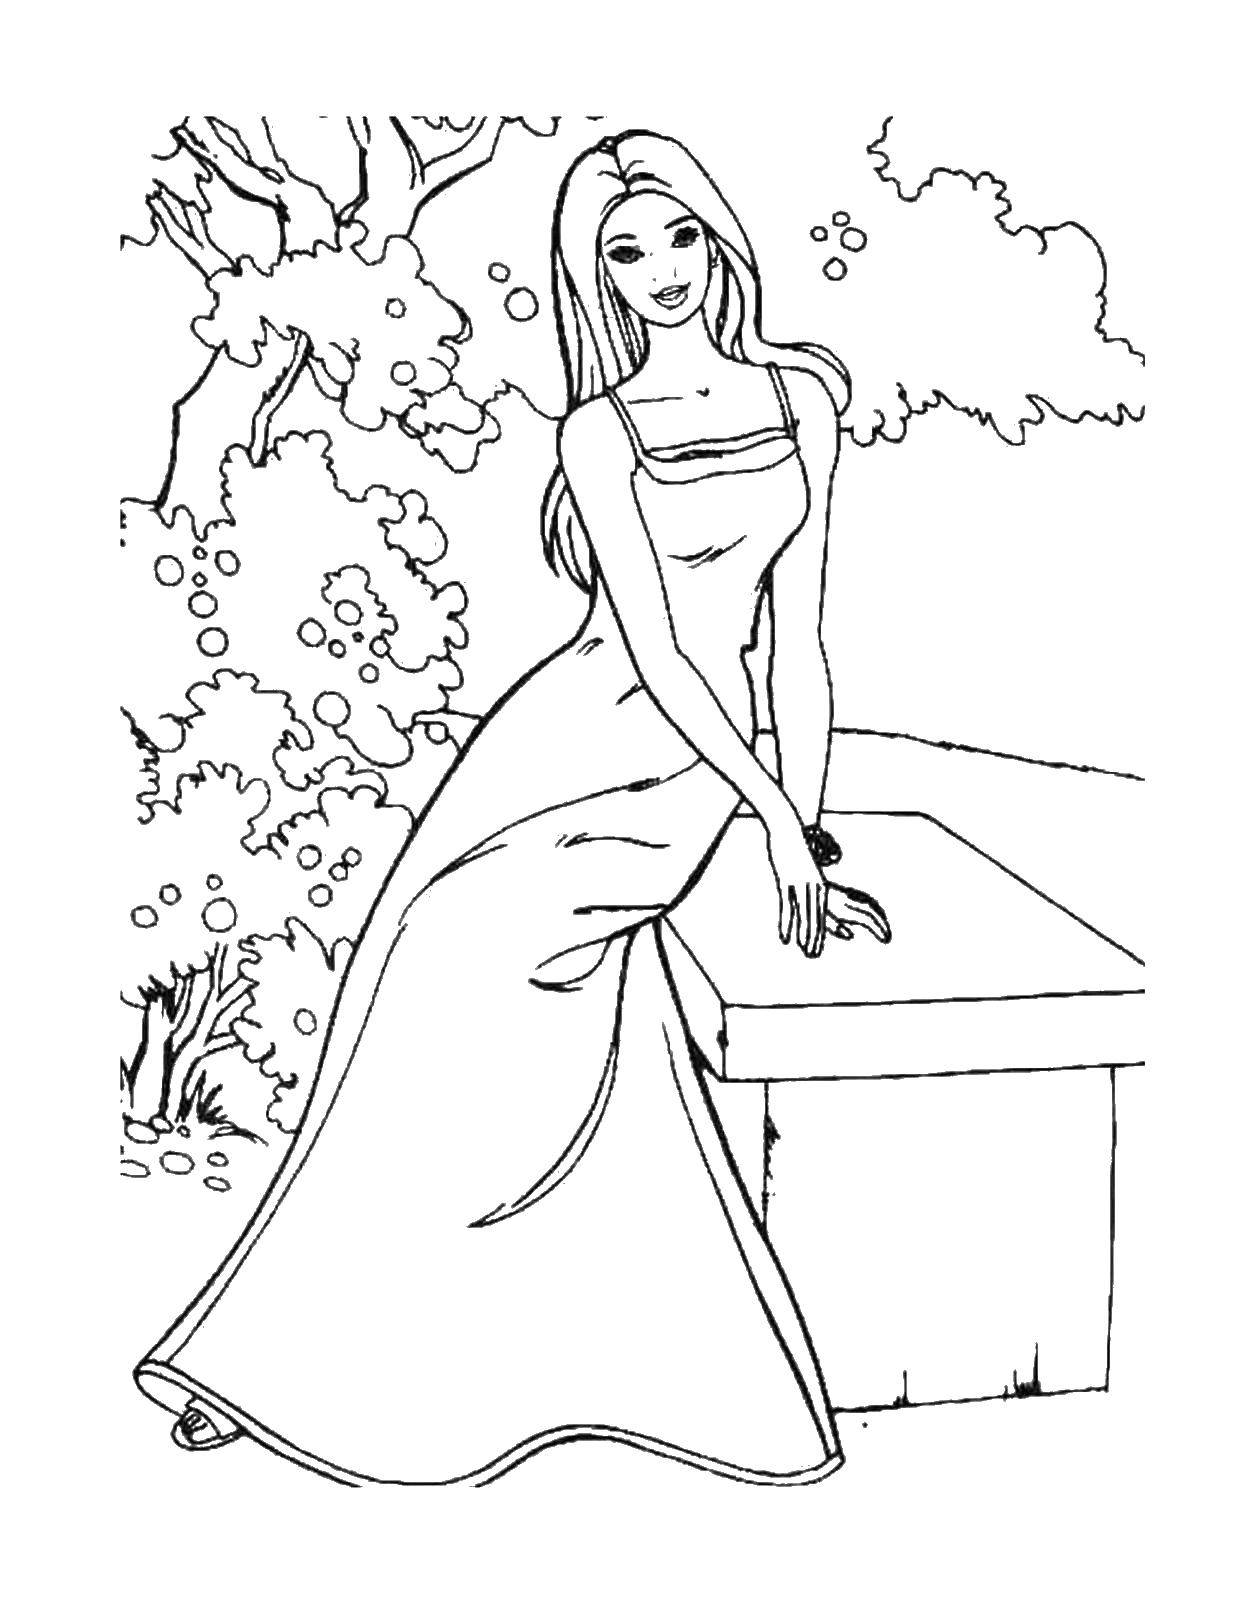 Coloring Barbie on the bench. Category Barbie . Tags:  Barbie , garden.